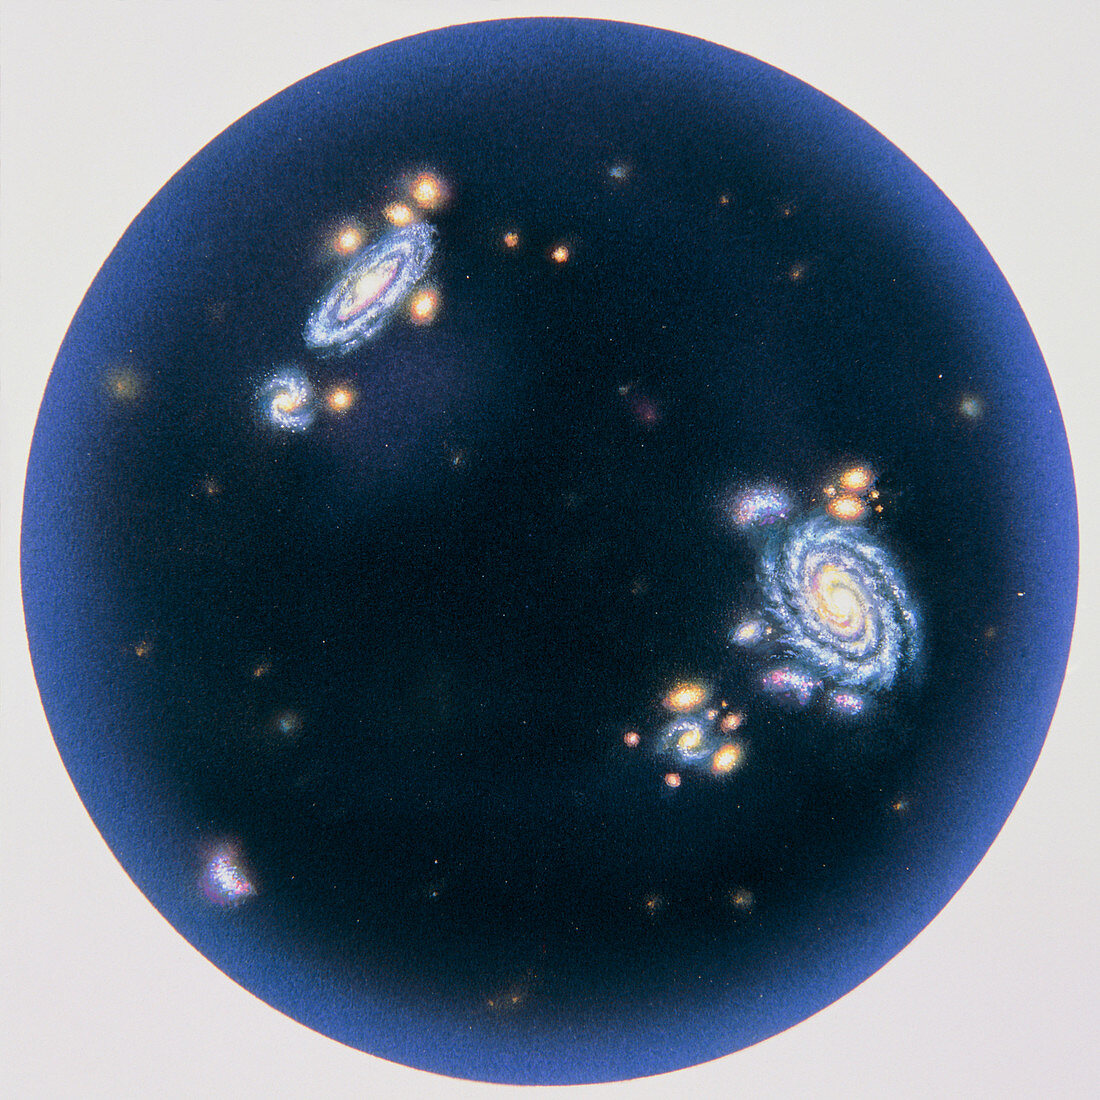 Artwork showing the Local Group of galaxies